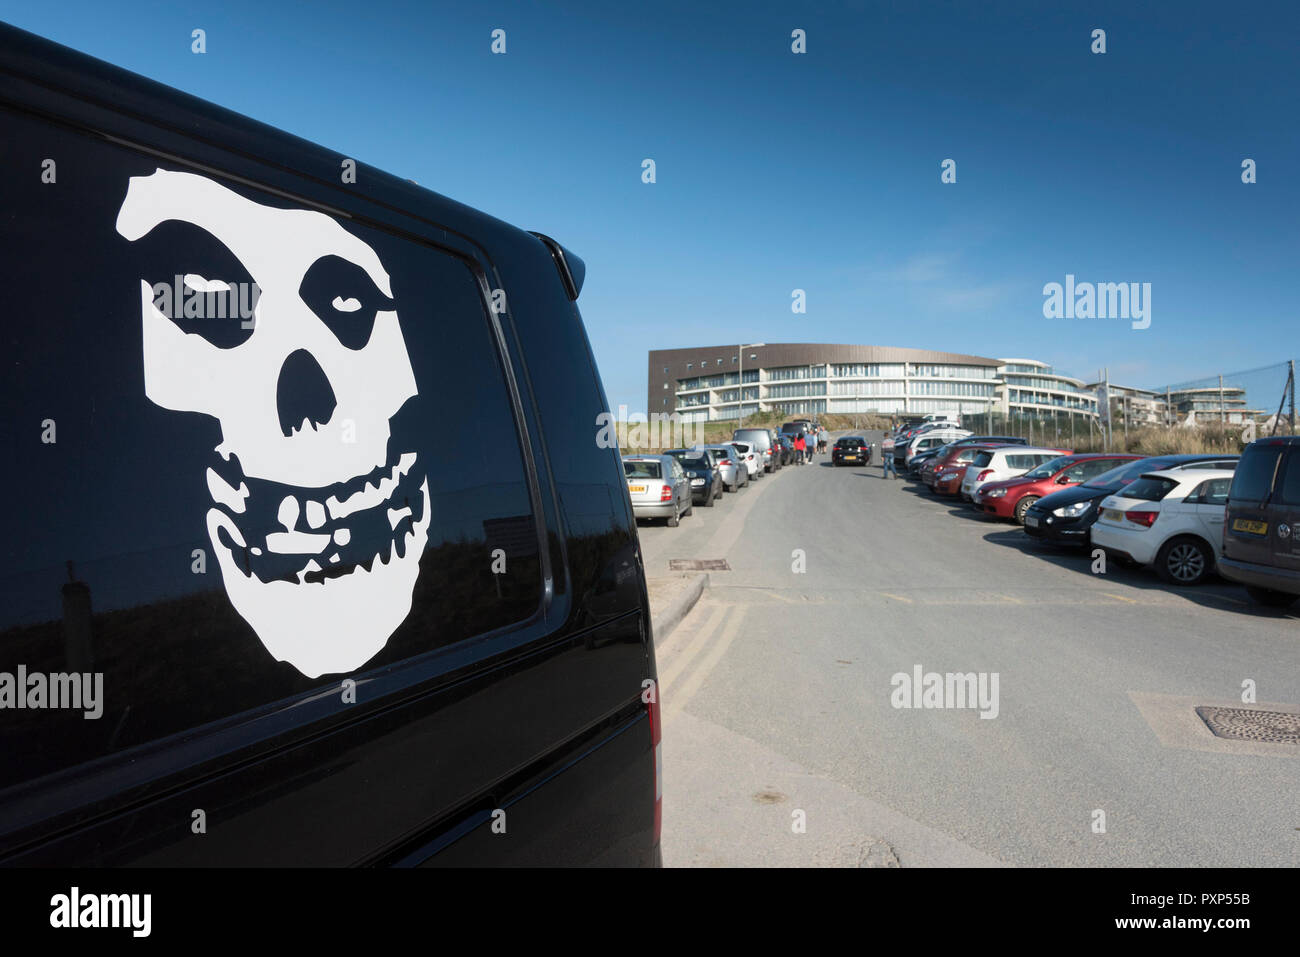 A white skull motif artwork on the side of a black van in the car park at Fistral in Newquay in Cornwall. Stock Photo